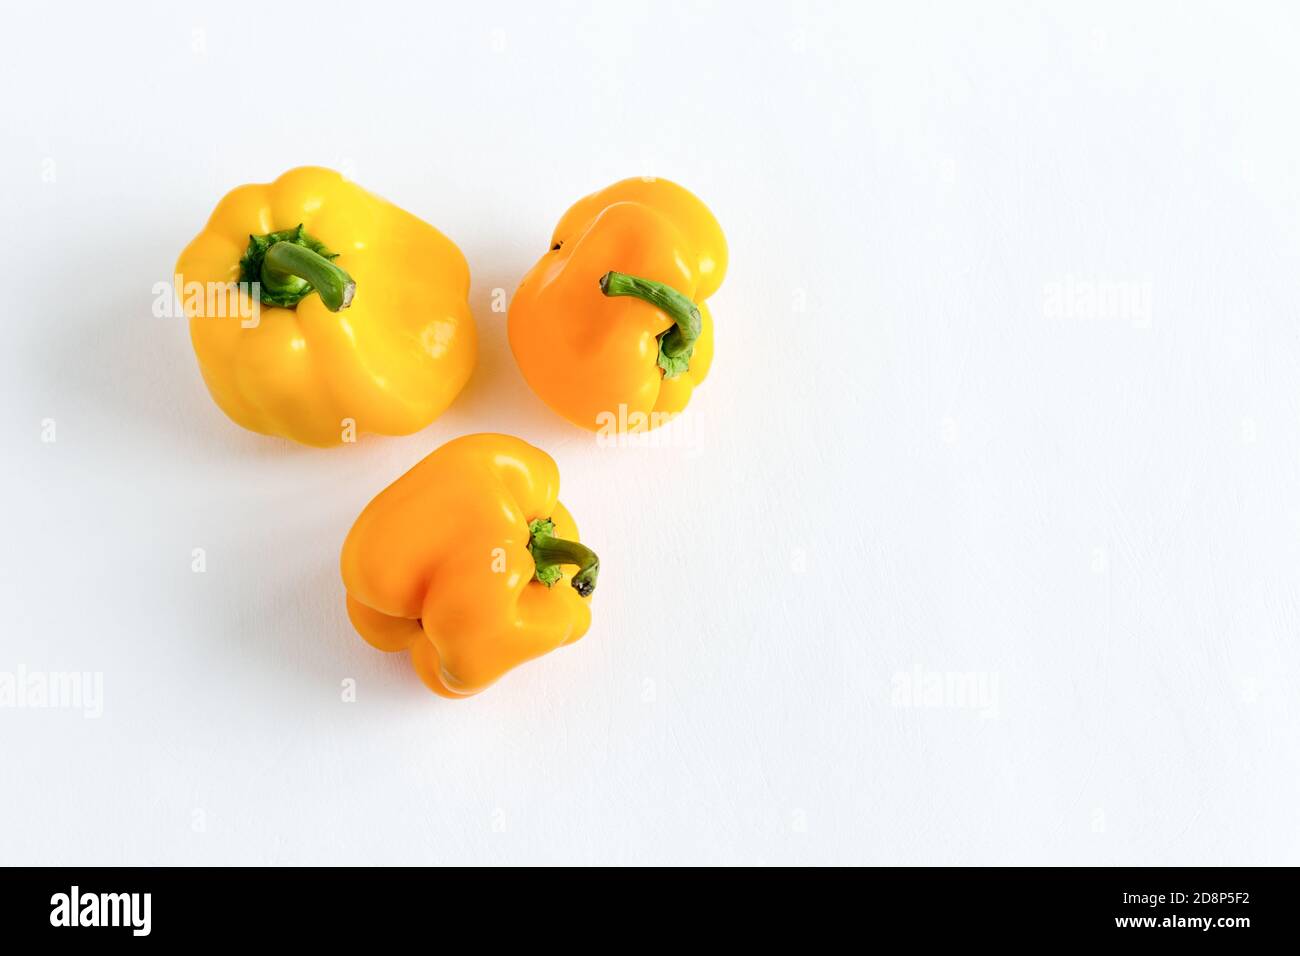 Deformed bell peppers isolated on a white background. Organic vegetables with an ugly shape. Imperfect vegetable or food waste concept. Flat lay with Stock Photo